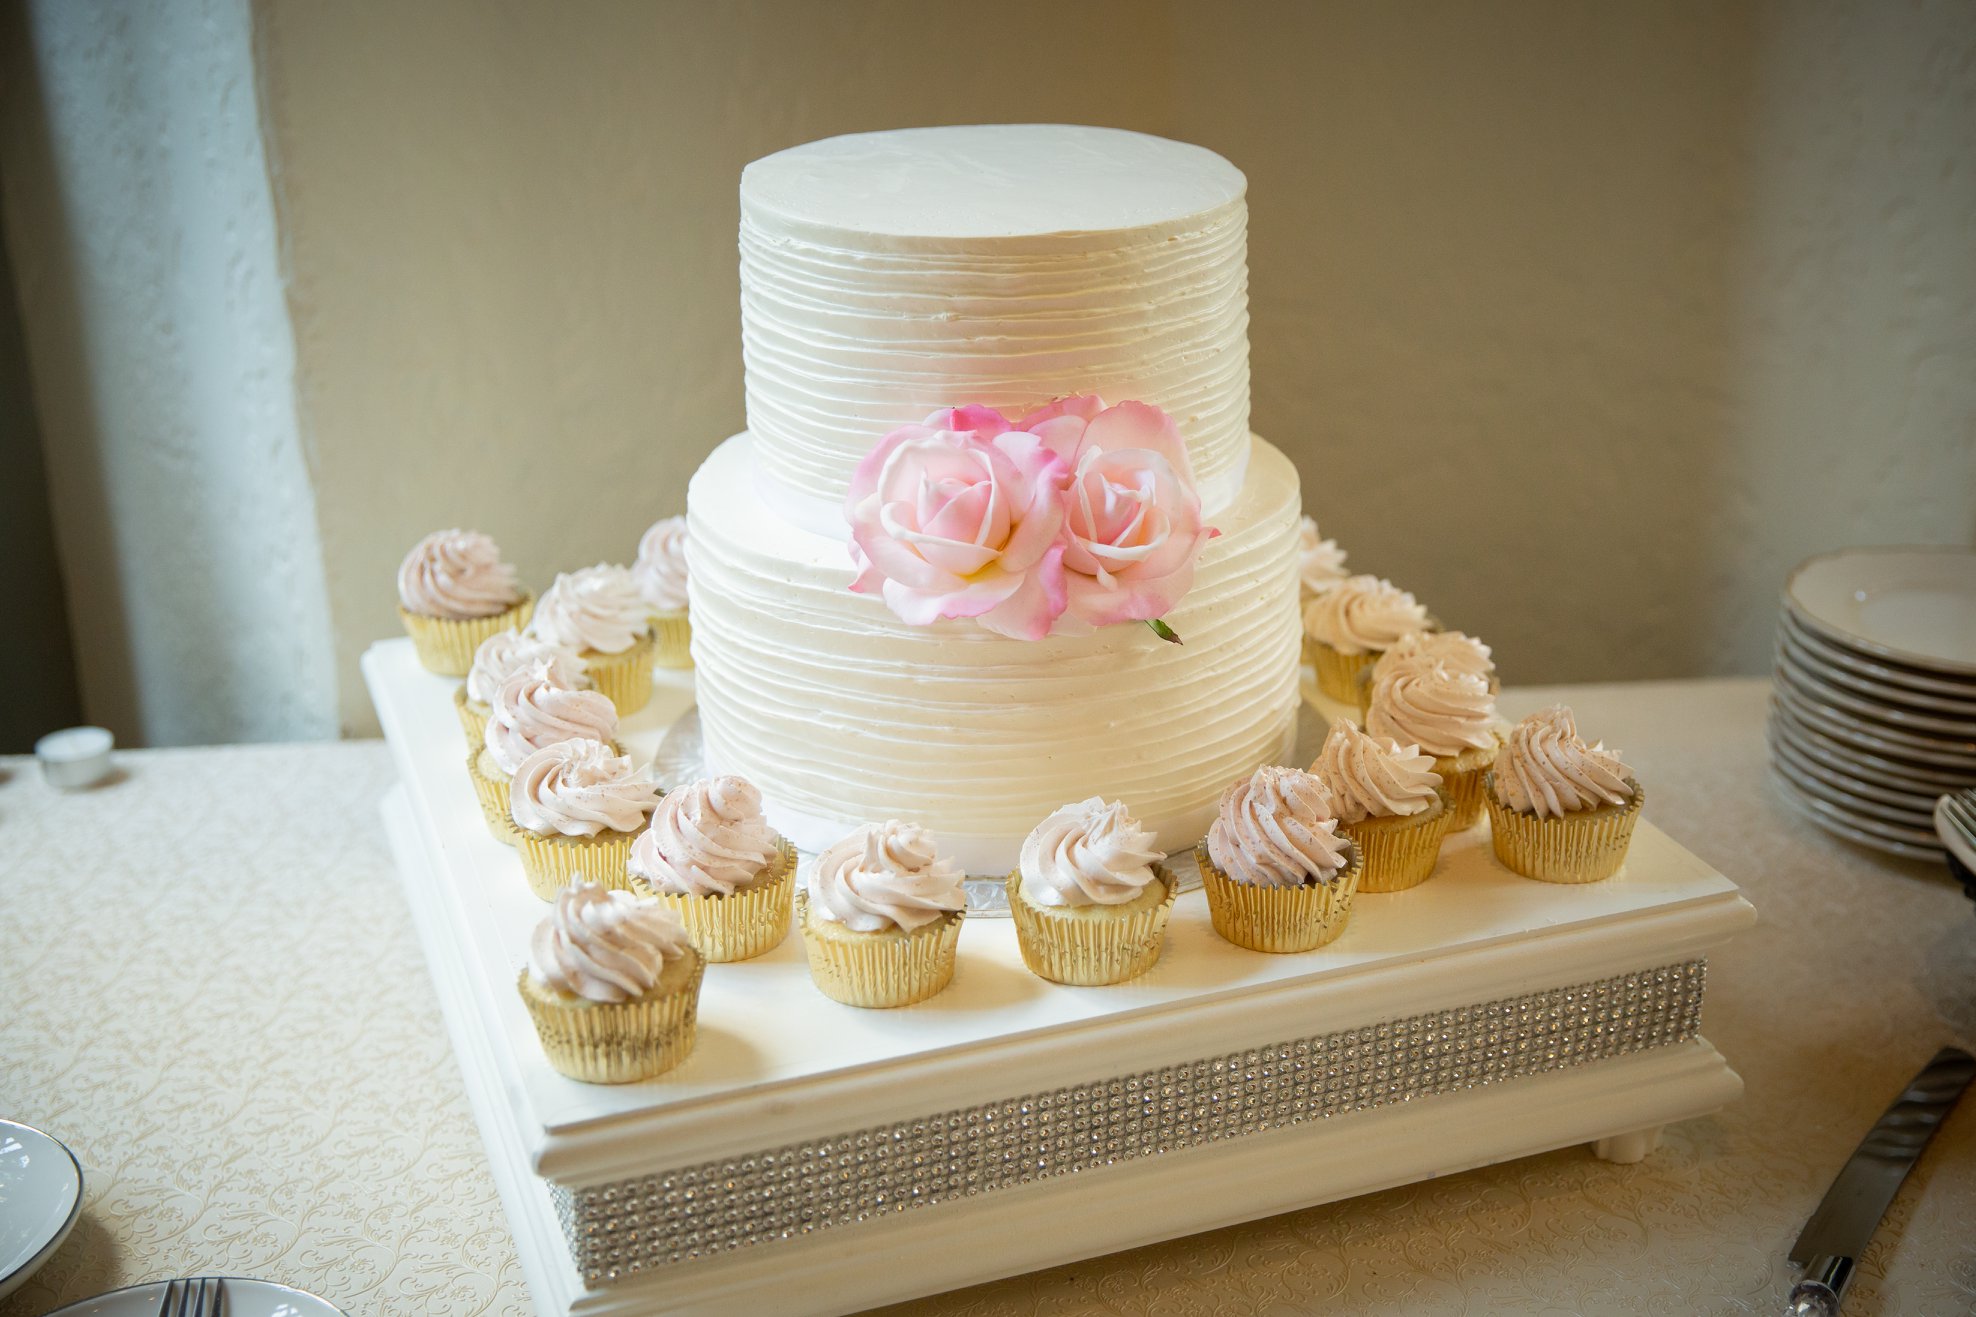 Image of cake with Pink Roses and Matching Cupcakes